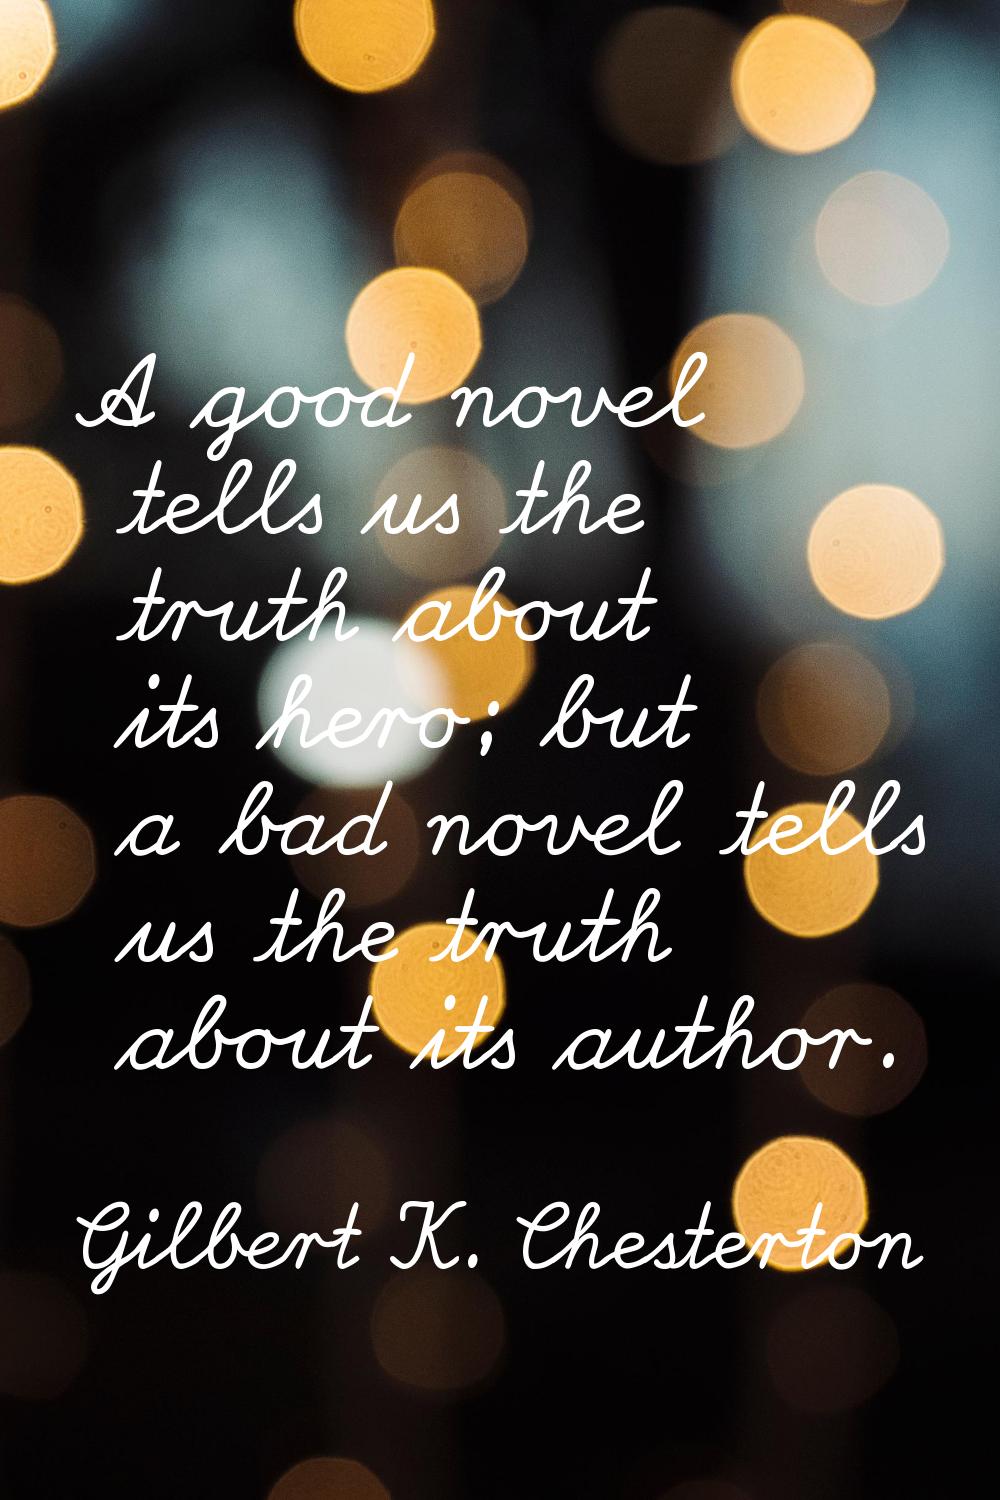 A good novel tells us the truth about its hero; but a bad novel tells us the truth about its author